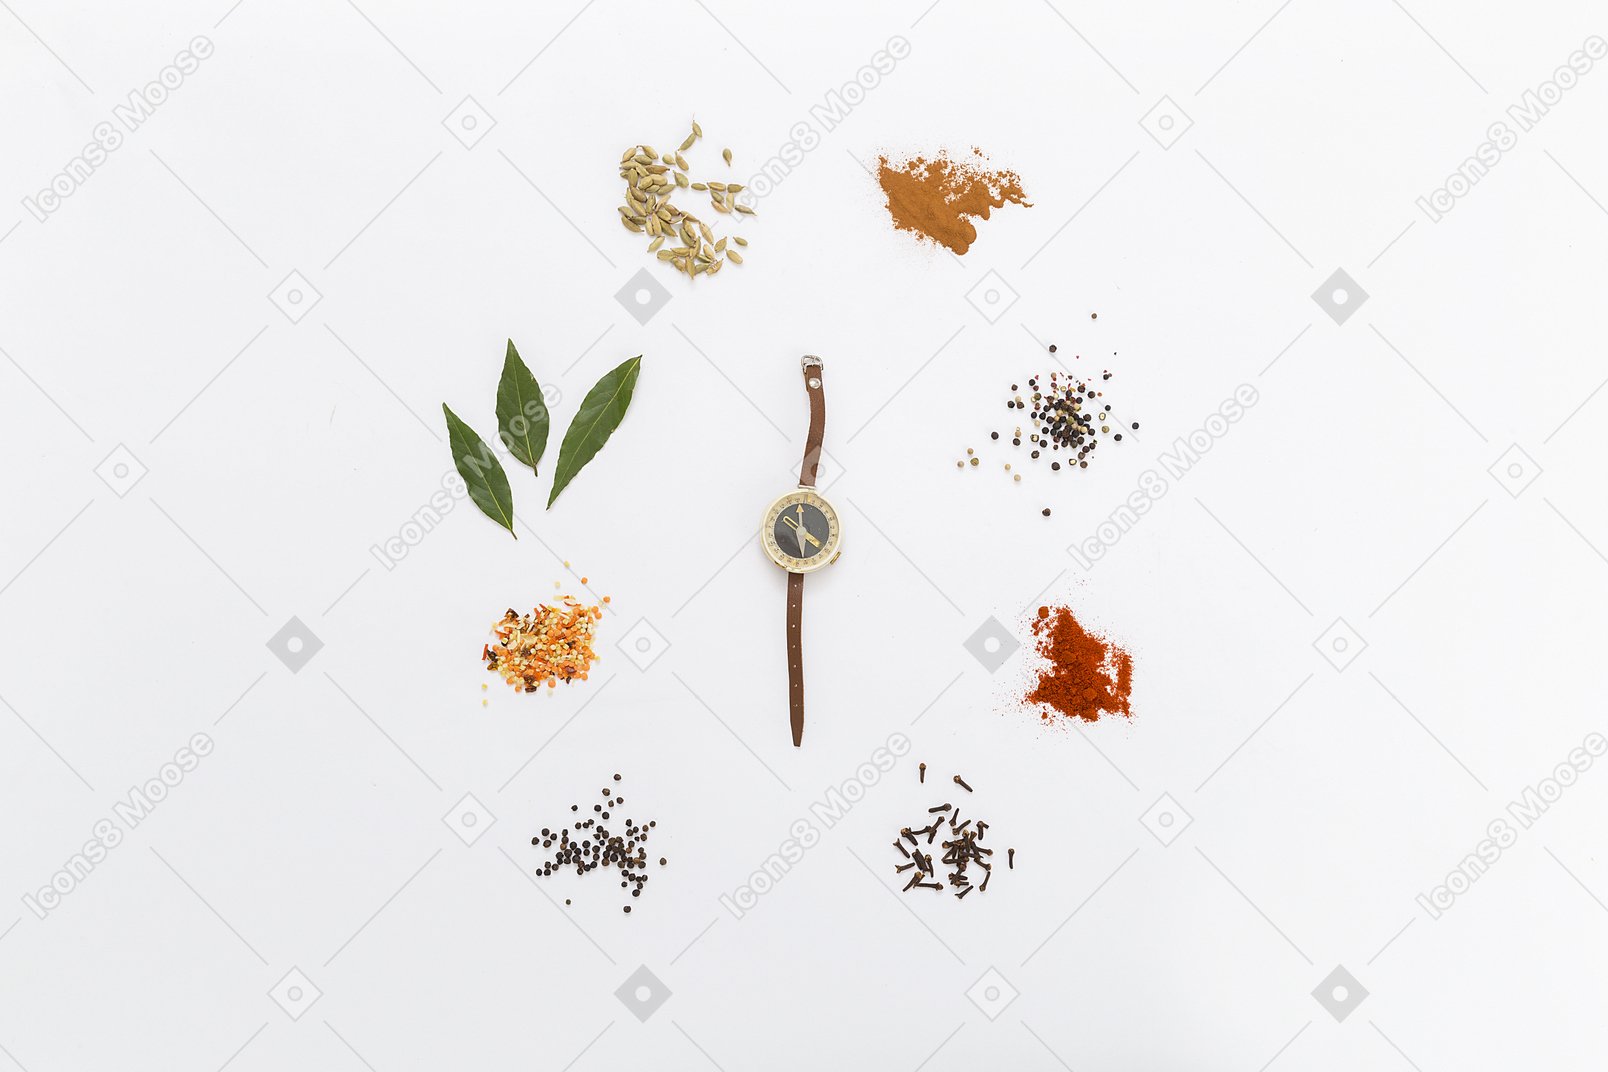 Circle of herbs and spices with compass in centre